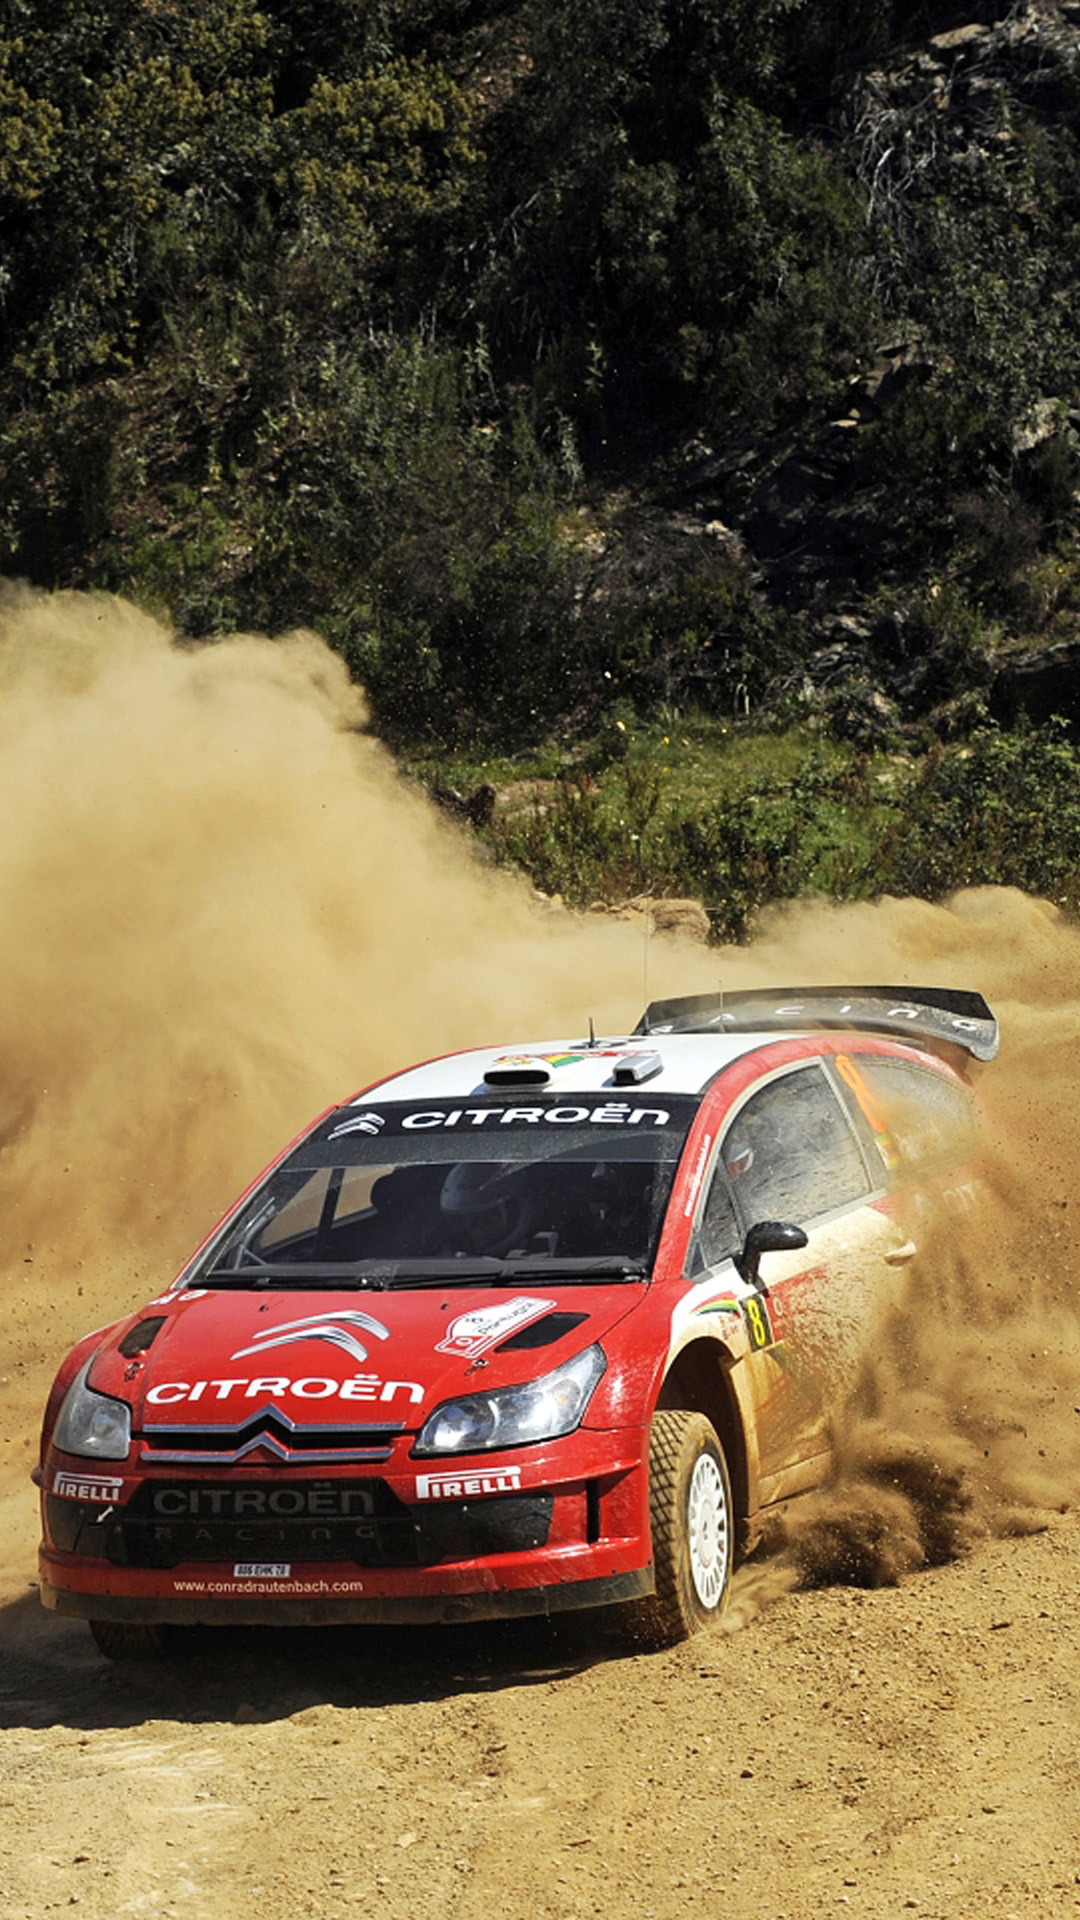 1080x1920 ... WRC Wallpapers HD - Wallpaper Cave Cars Archives - Page 3 of 14 -  Wallpapers for iPhone, Samsung and .